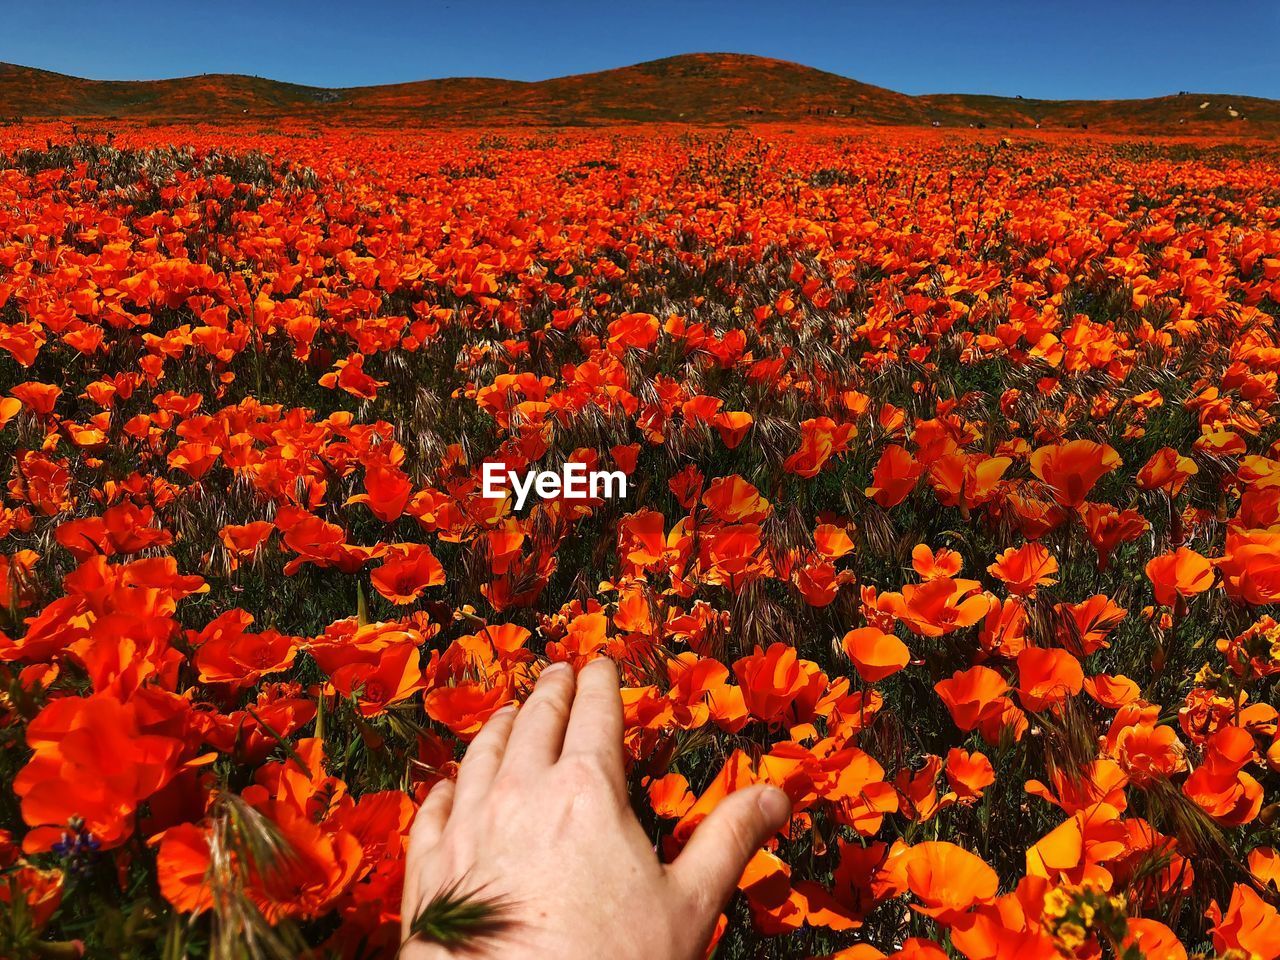 Cropped hand touching orange flowers on field